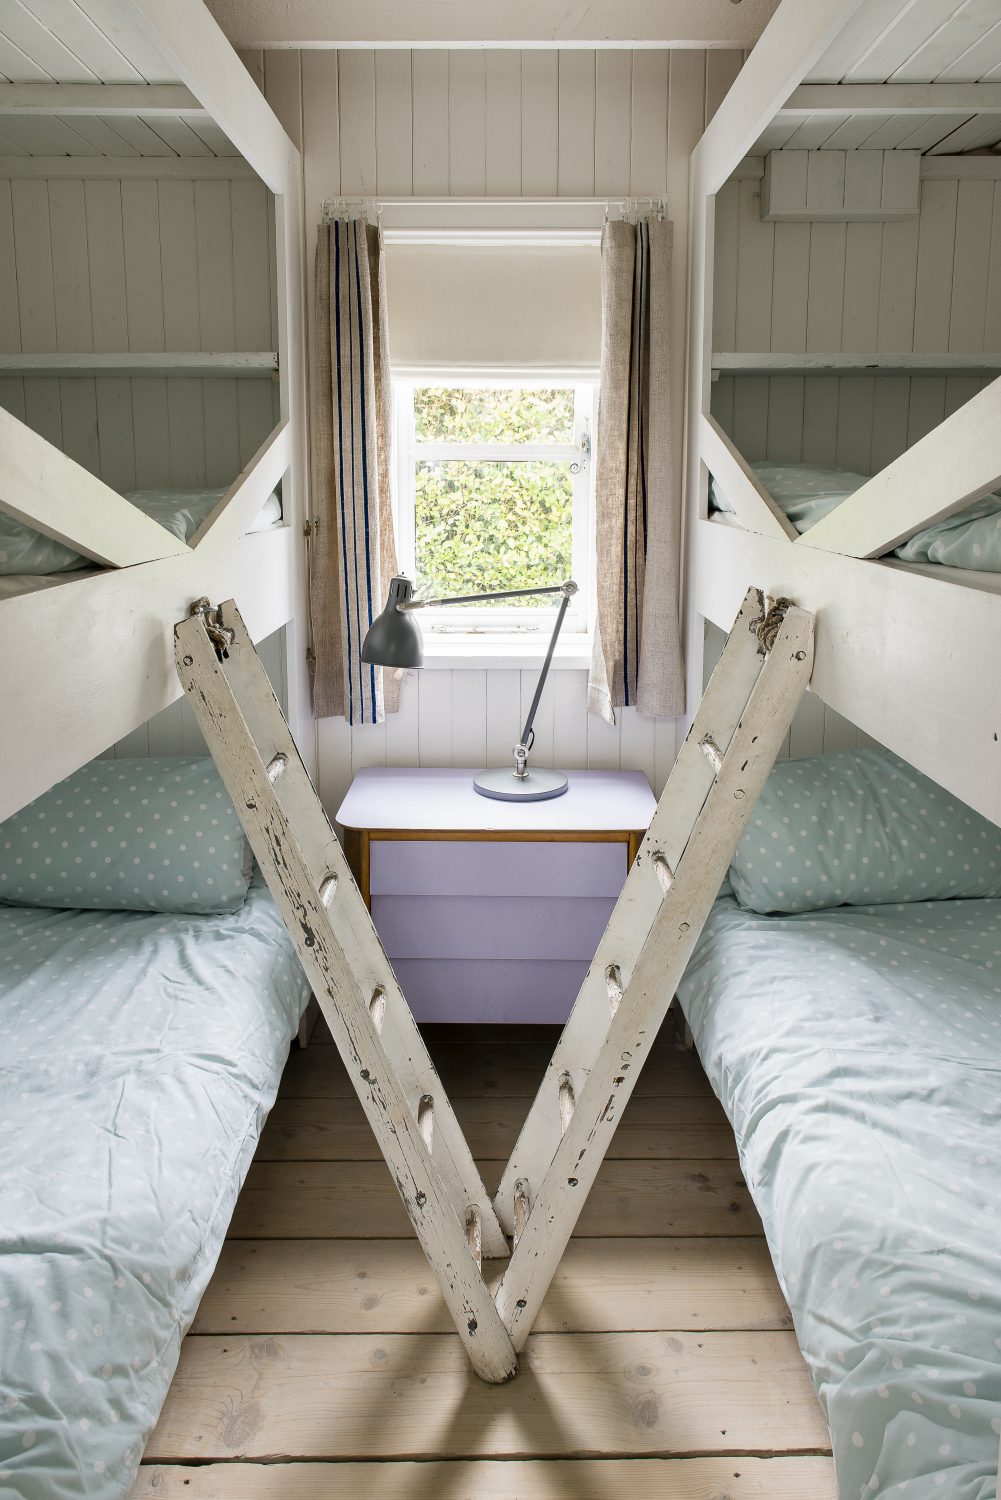 The bunks in the children’s bedroom were designed and built by Dave and Atlanta to make the most of the relatively small space